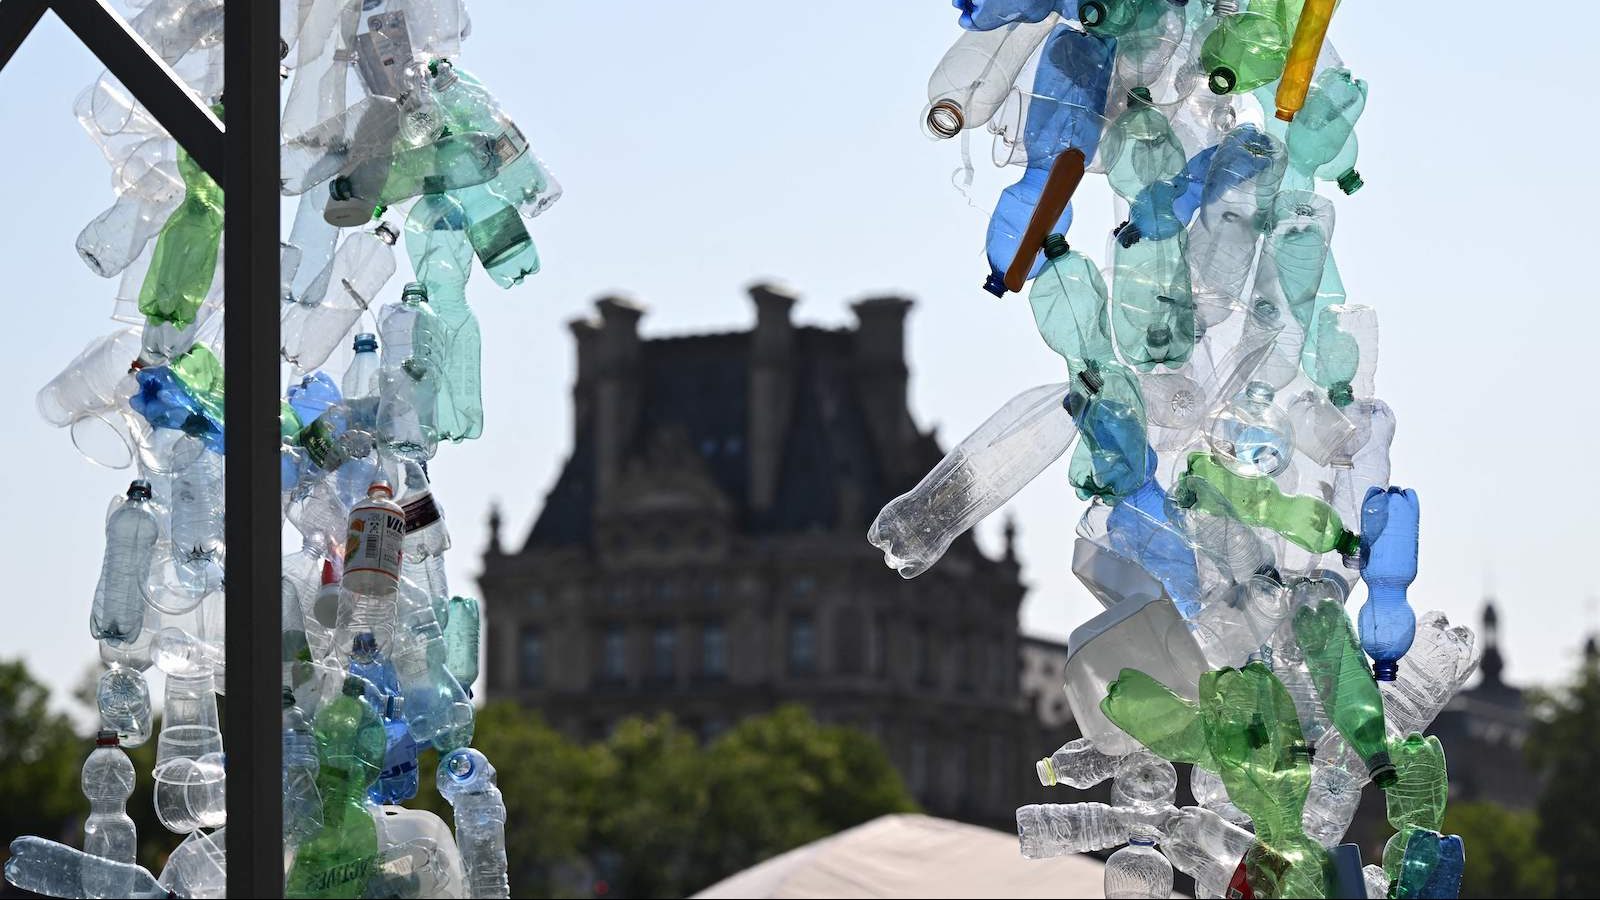 Plastic bottles in a sculpture, with building in background